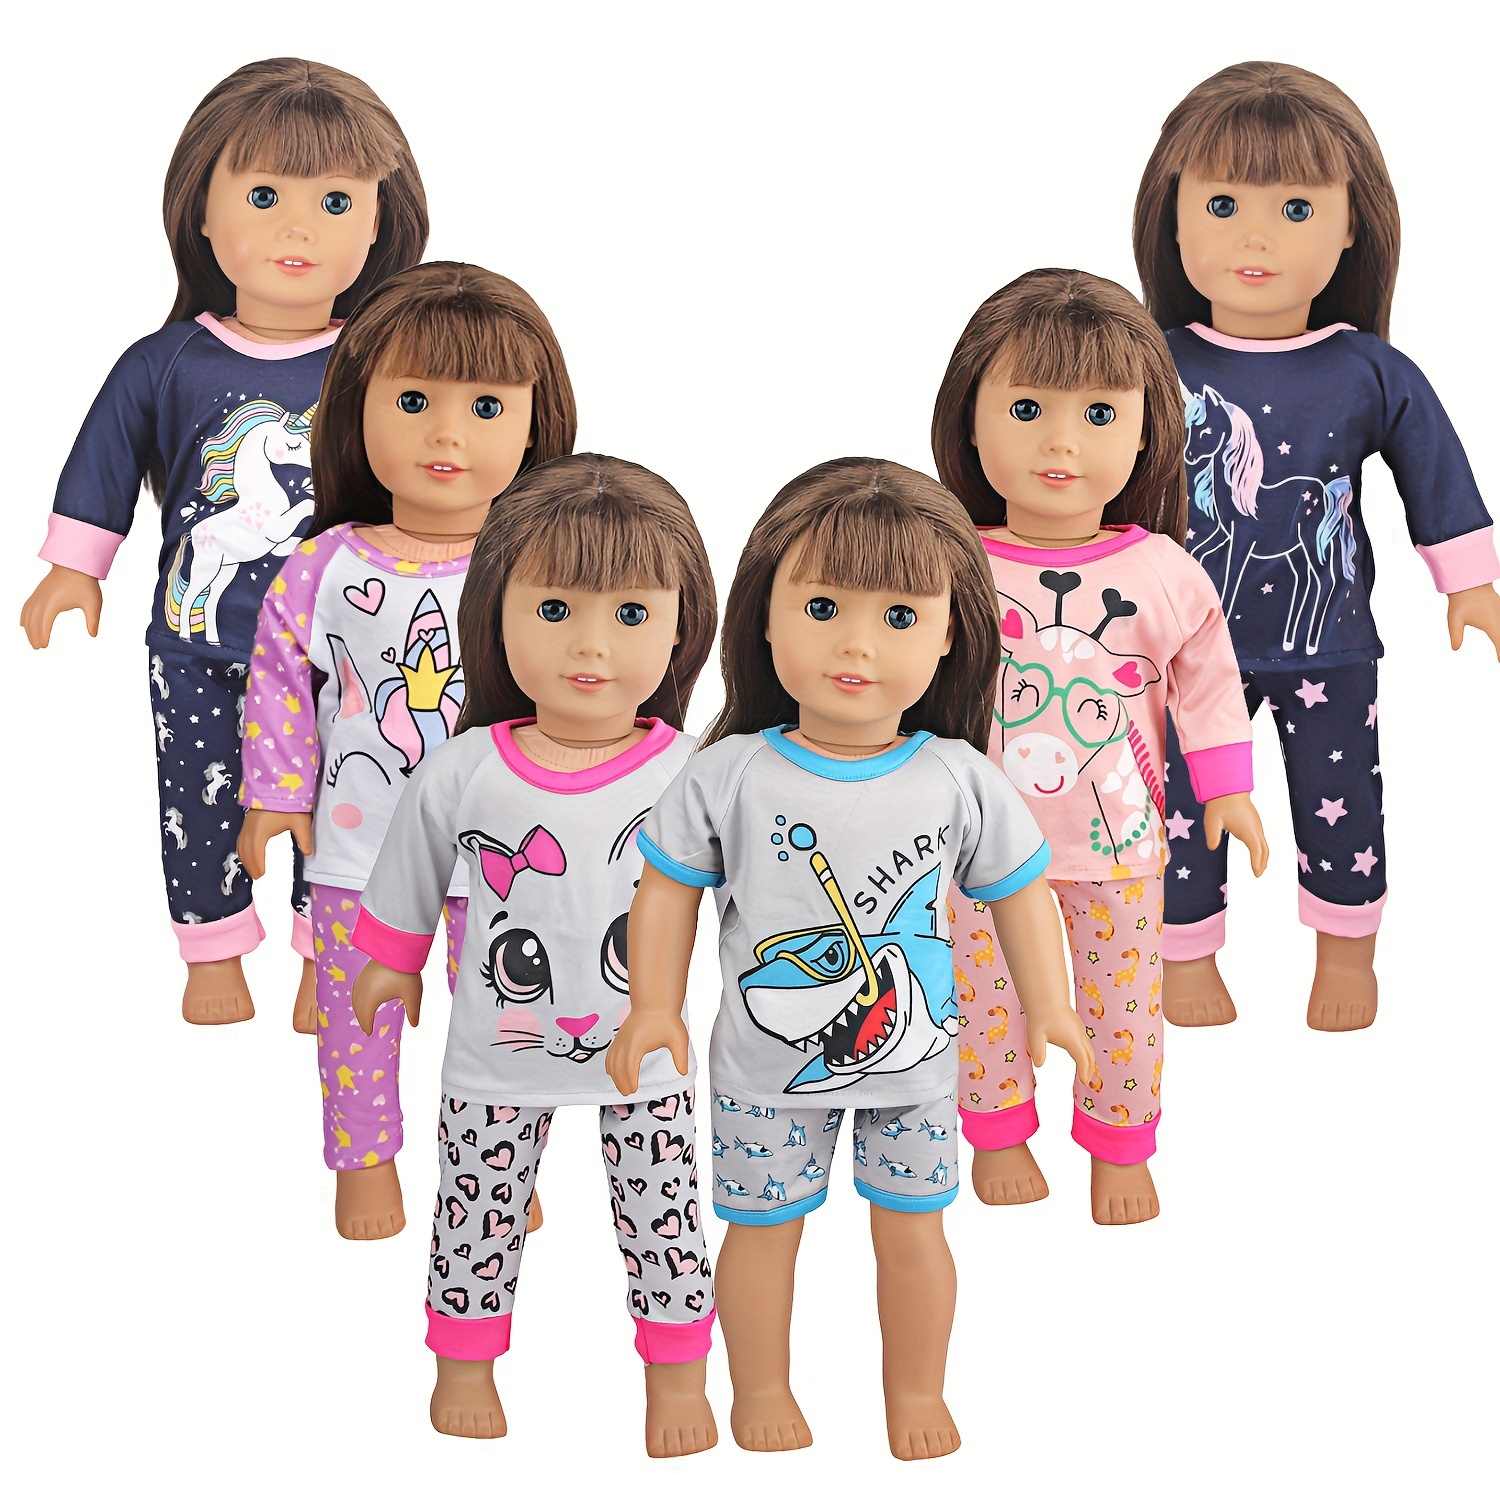 18-inch Doll Summer Short Sleeved Pajamas, Bald Doll Change Shorts Suit